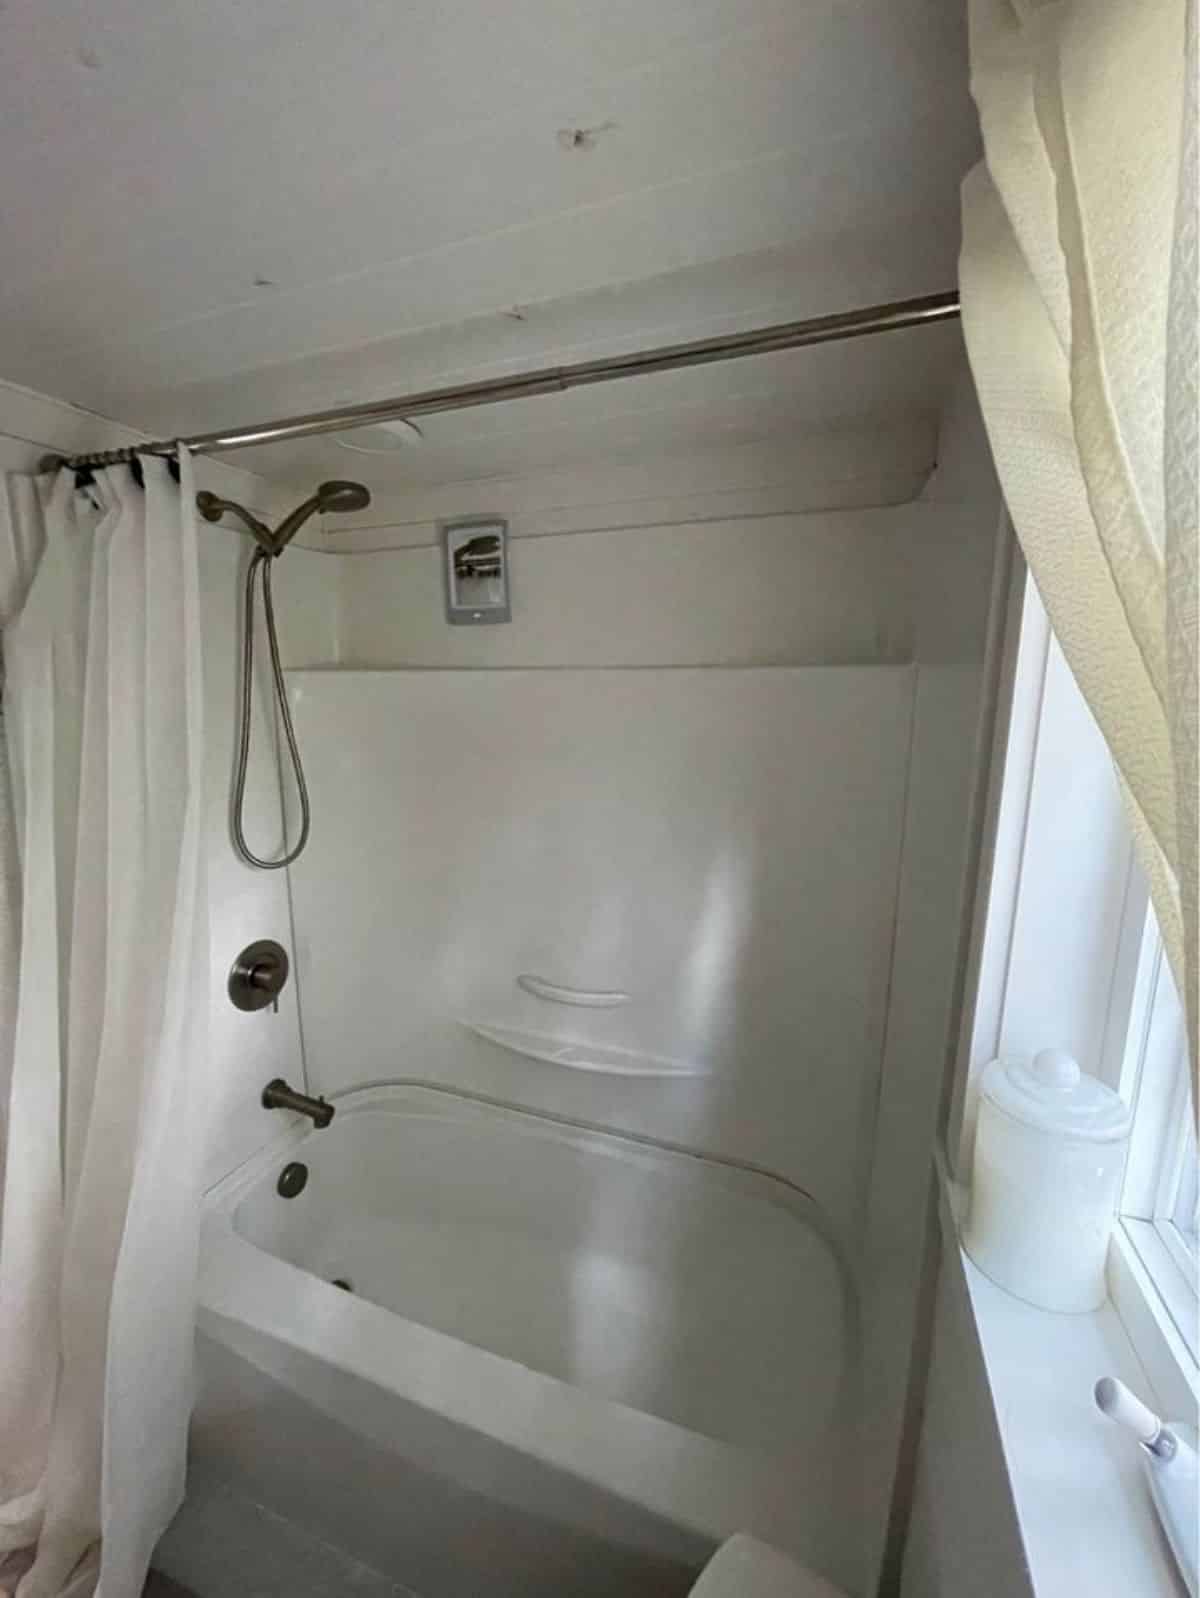 bath tub in bathroom of tiny home with lot